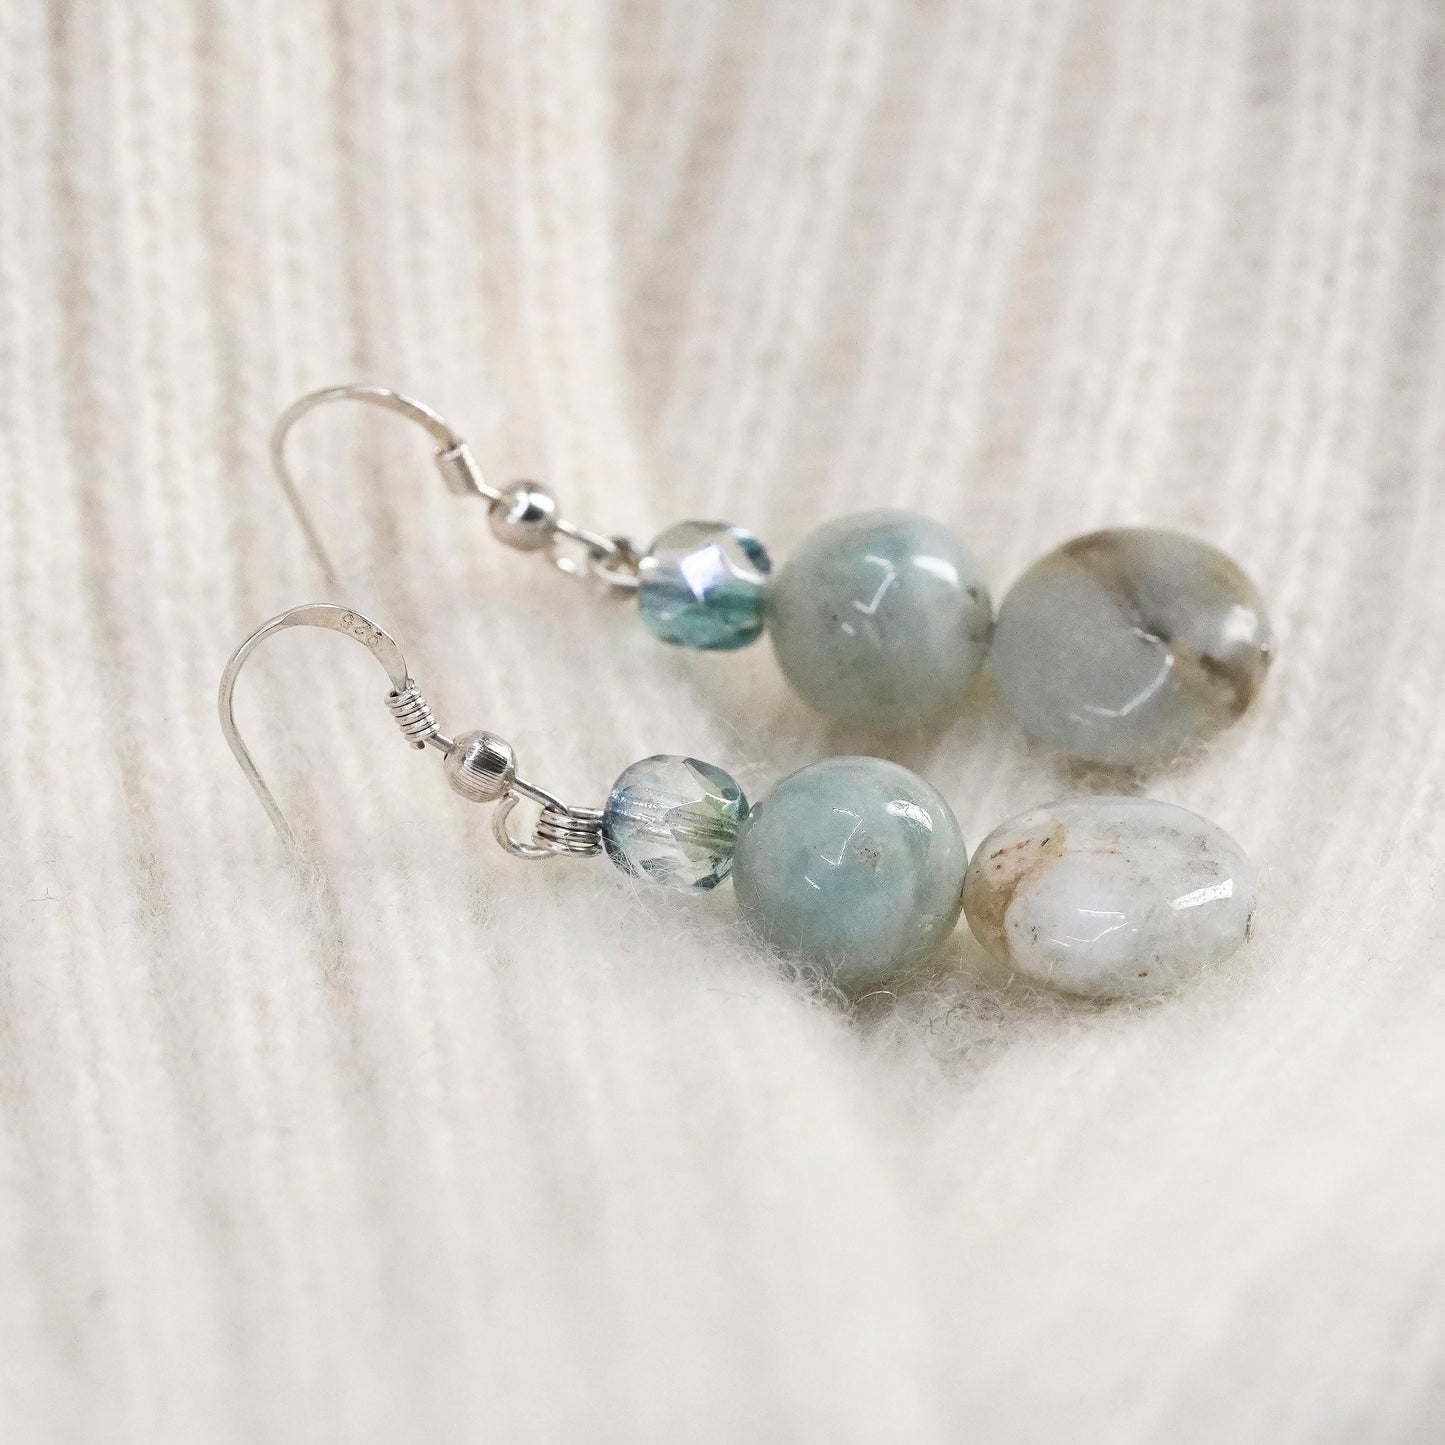 Vintage sterling silver handmade earrings, 925 hooks with jade and topaz beads